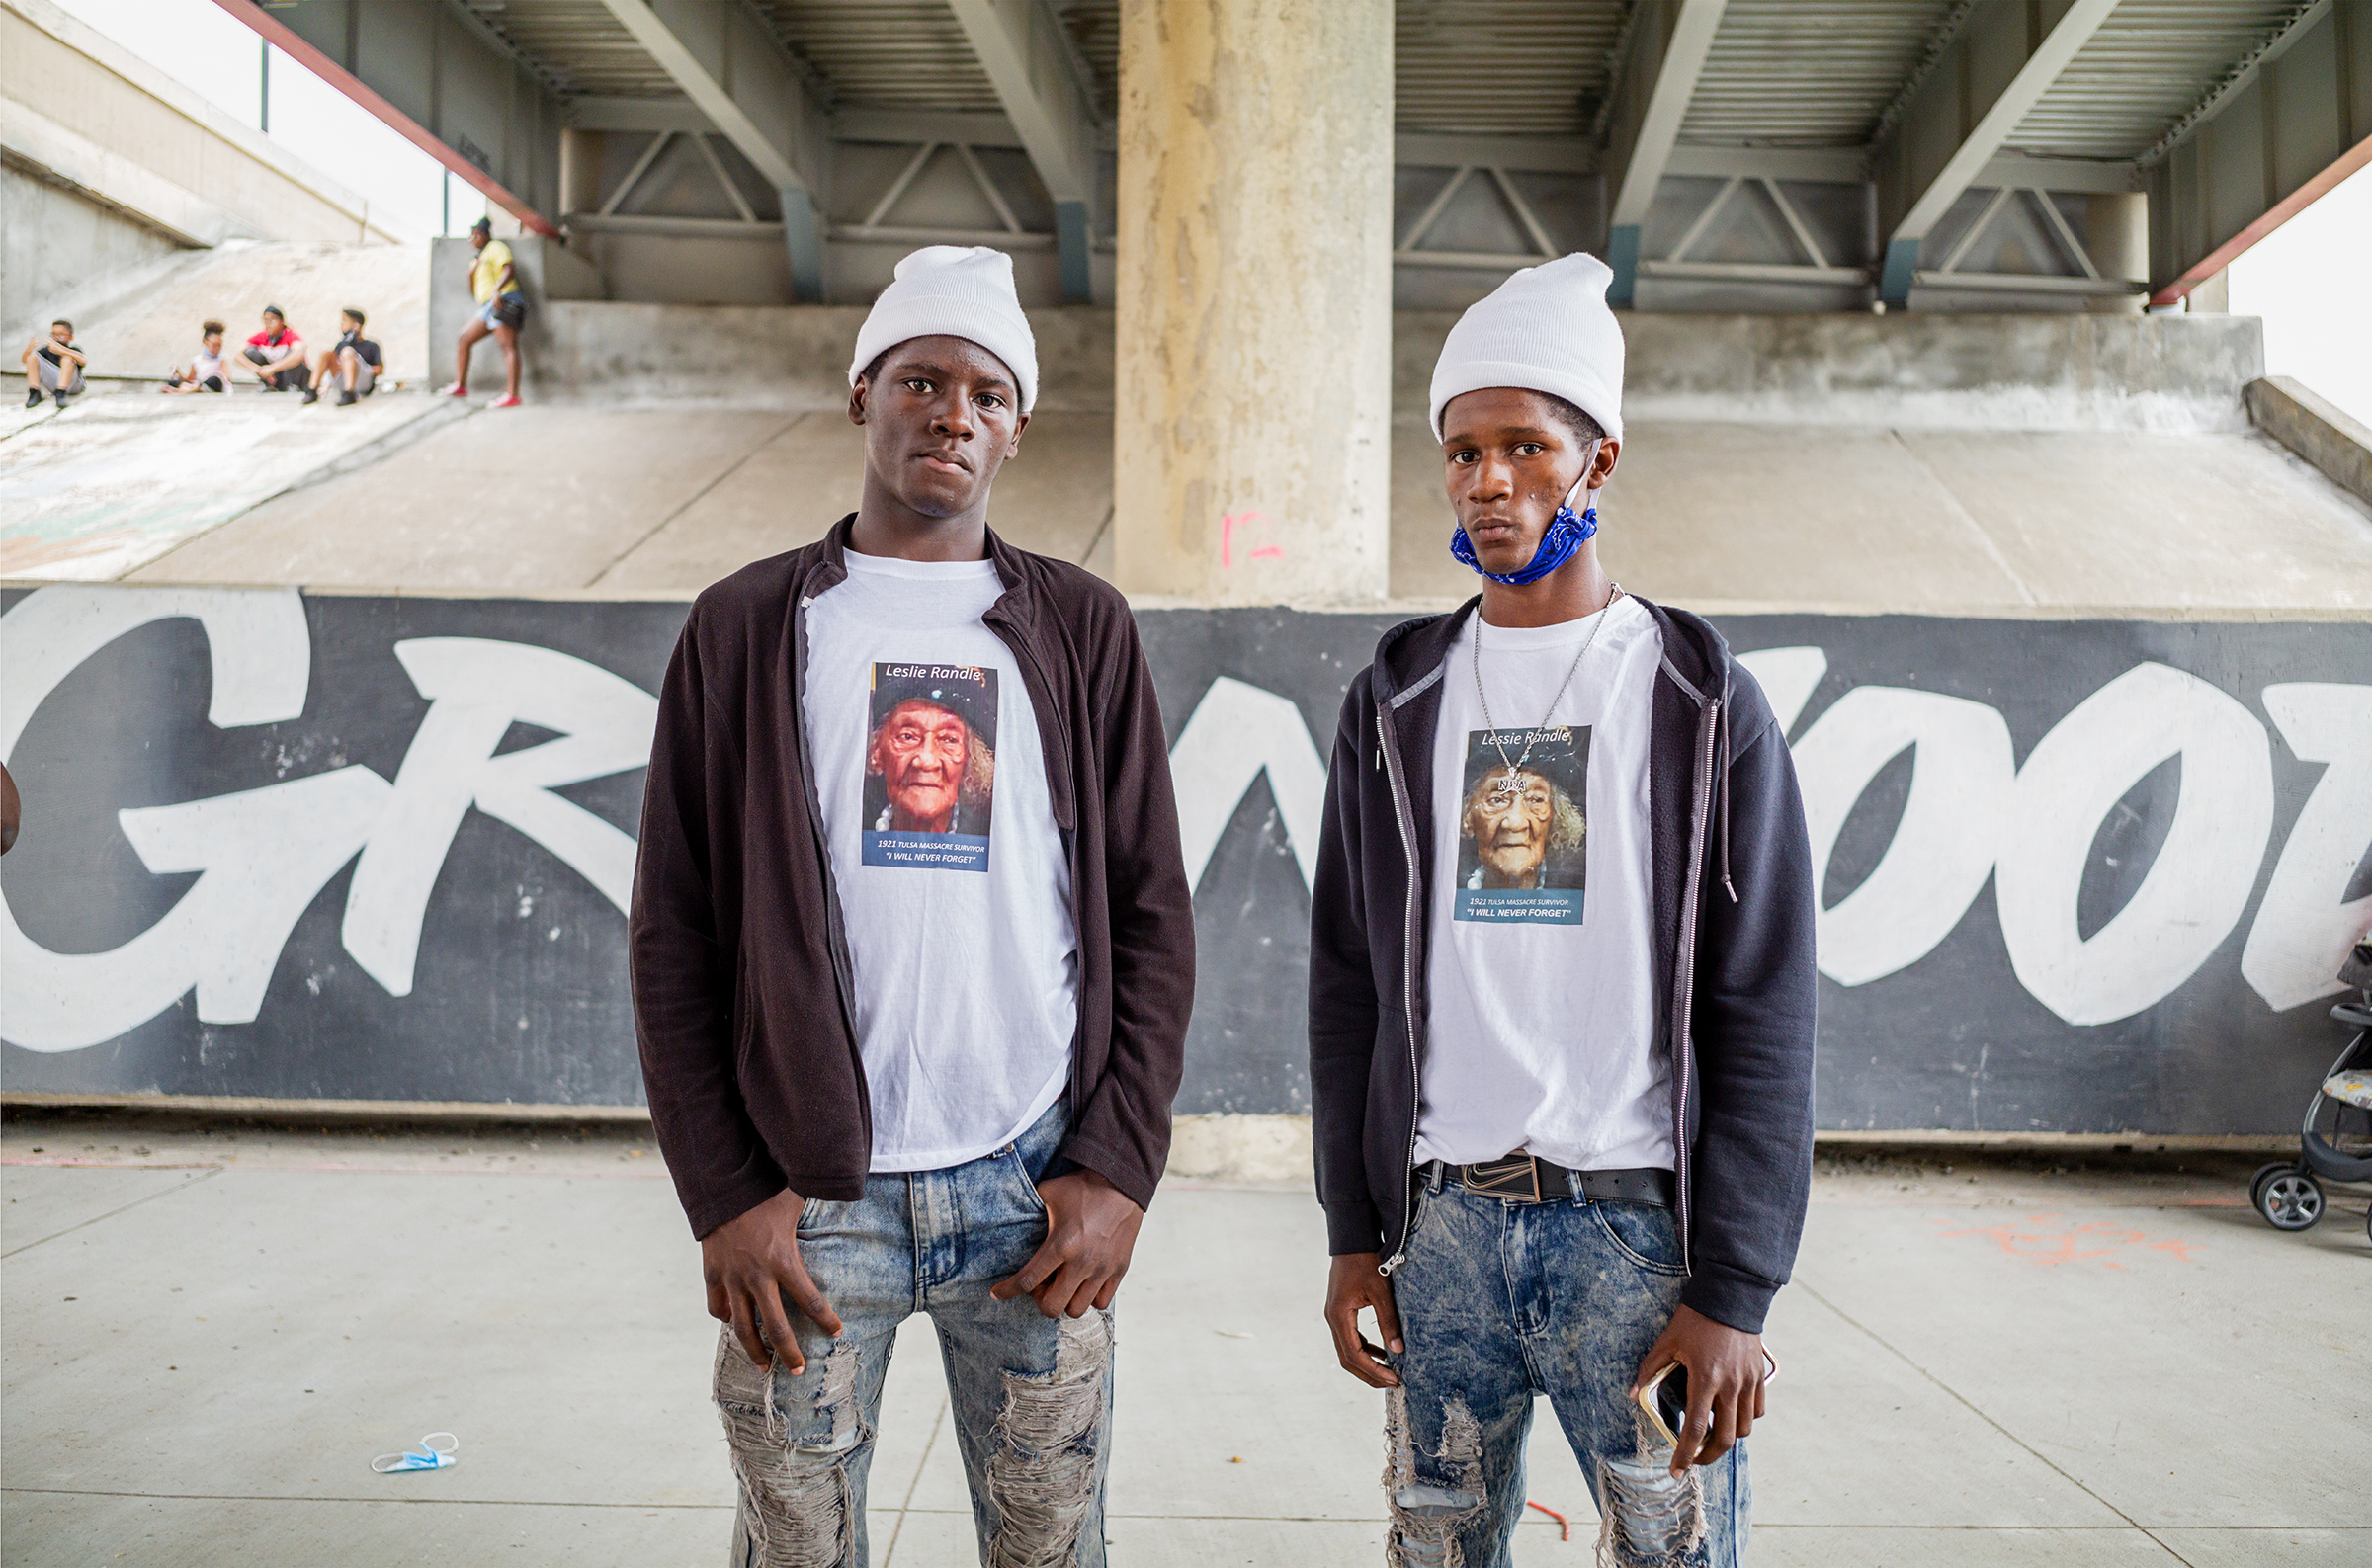 At Juneteenth celebrations in Tulsa's Greenwood district, the site of one of American history’s worst-ever episodes of racial violence, Deshon and Omarion wear T-shirts depicting their grandmother Leslie Randle—who was alive during the 1921 massacre, when hundreds of Black-owned homes and businesses in the area were burned and more than 300 Black people were killed. "She told us that the bodies were taken away and stacked on a hill up by [Oklahoma State University]," says Deshon. "Every time we heard the stories it made us upset. But she made us listen." (Ruddy Roye for TIME)